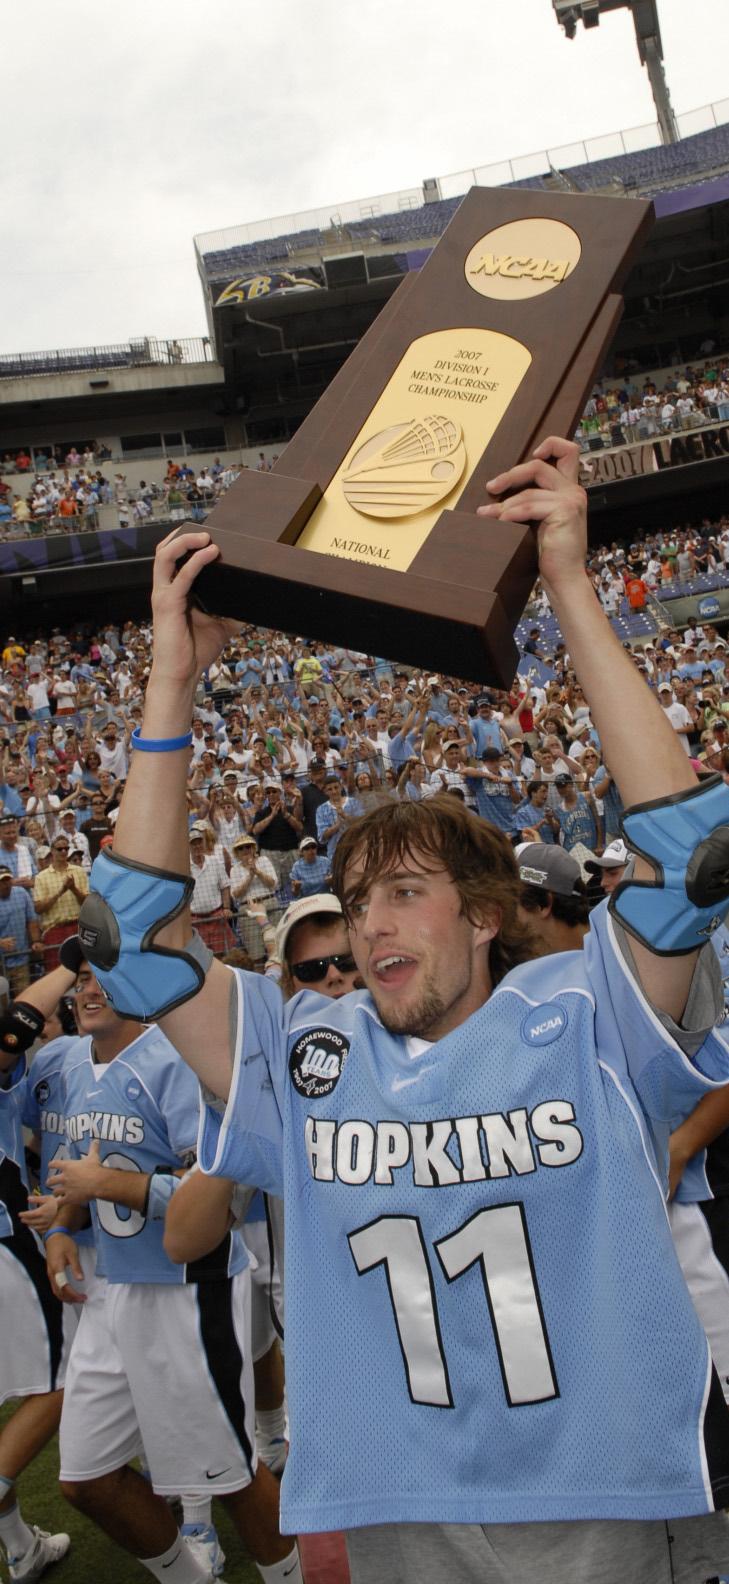 752) The 899 wins Johns Hopkins has accumulated are the most in the history of college lacrosse Johns Hopkins has qualified for the NCAA Tournament in each of the last 39 years.